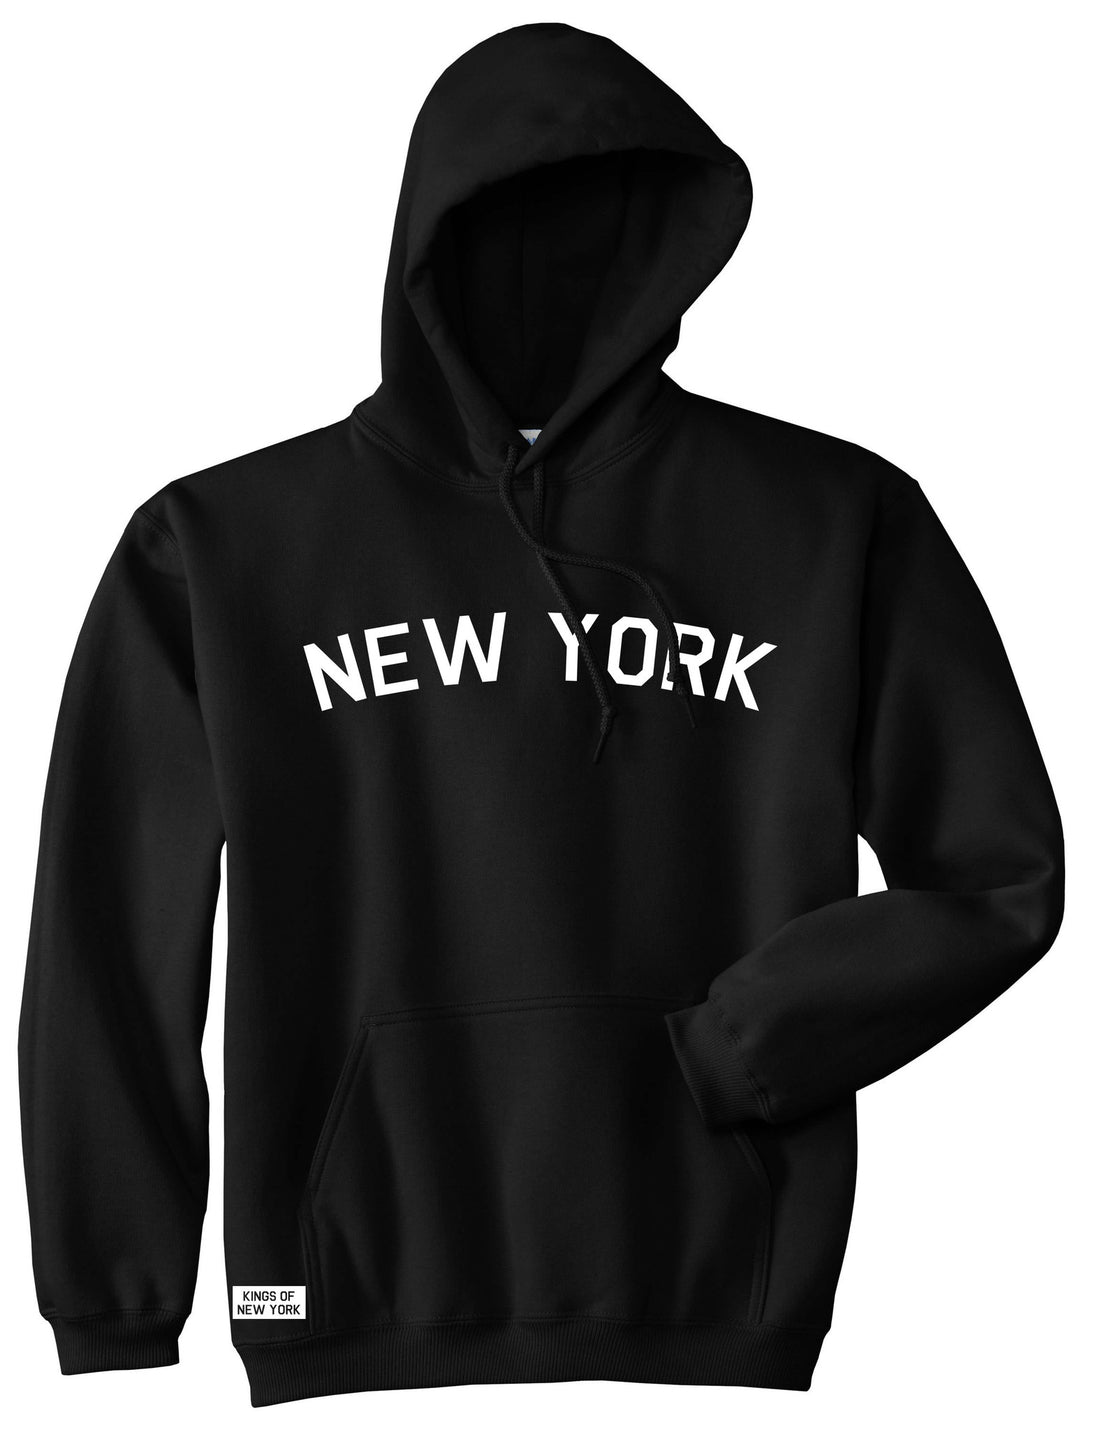 New York Arch Pullover Hoodie Hoody in Black by Kings Of NY